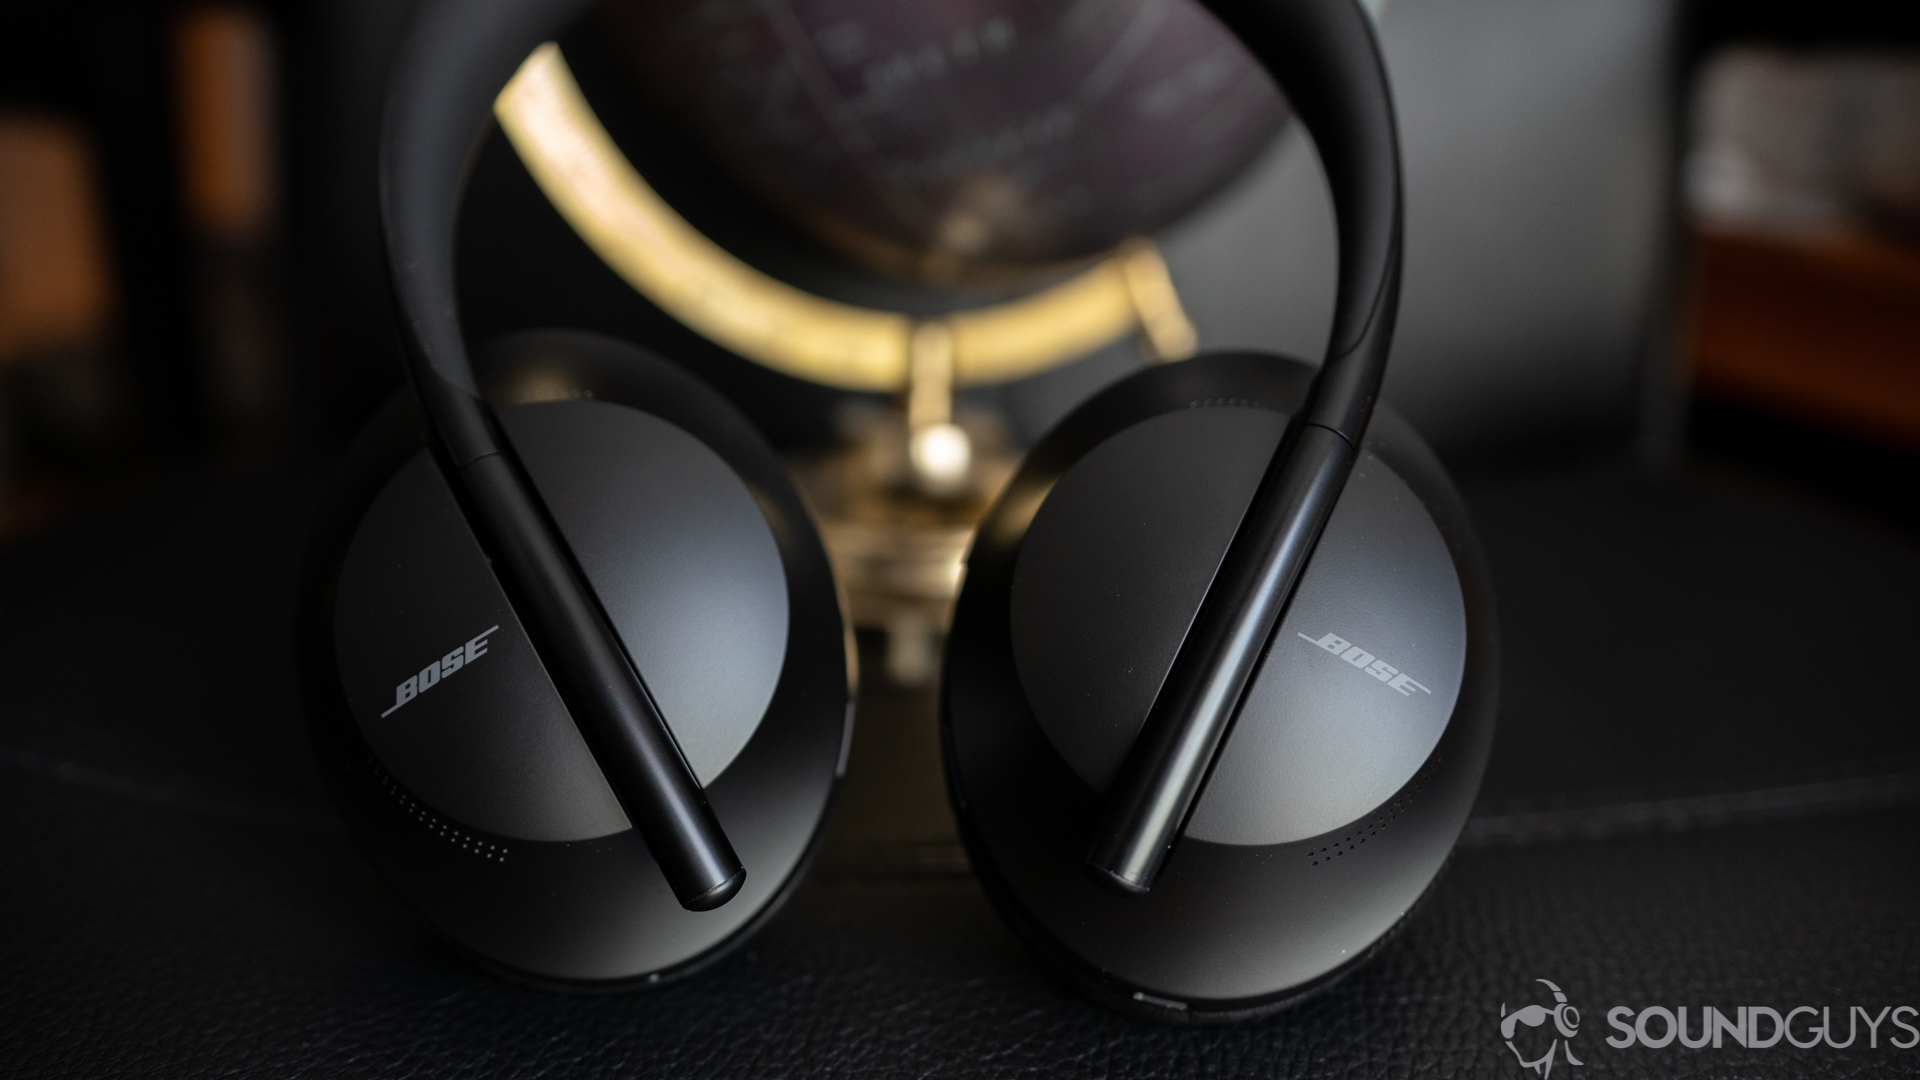 The Best Headphone Deals Of August Android Authority